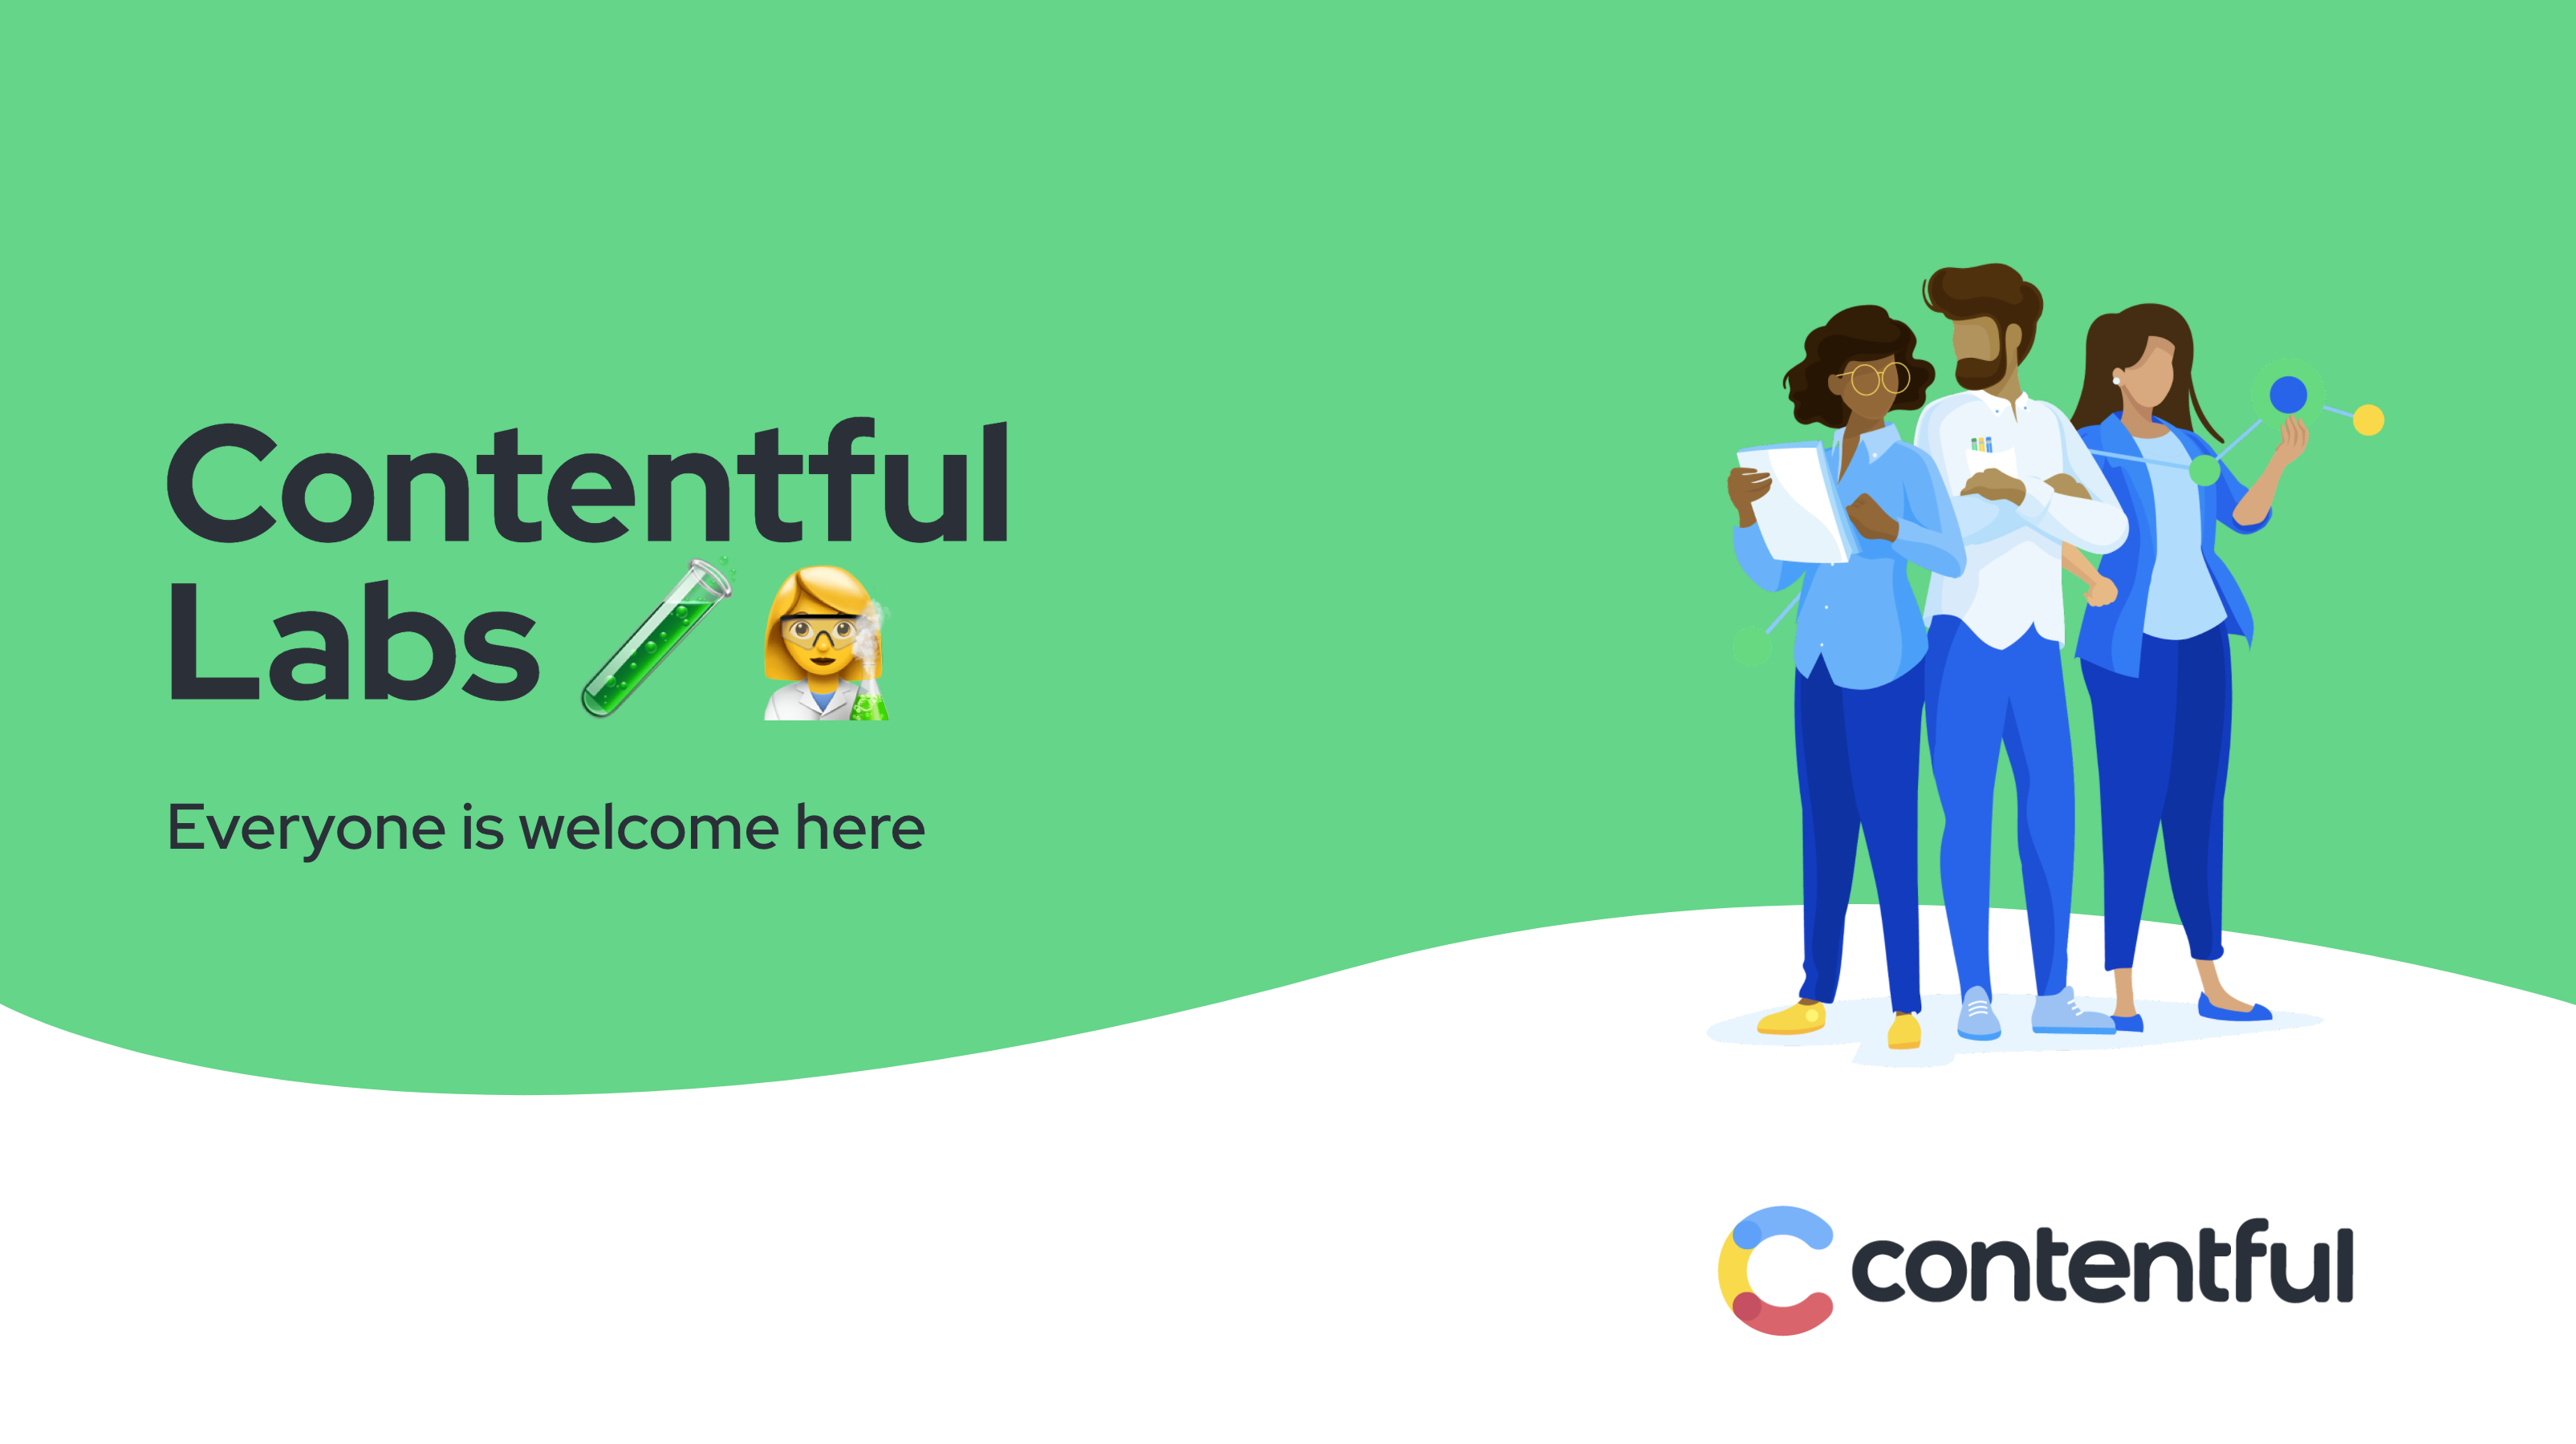 Contentful Labs – Everyone is welcome here